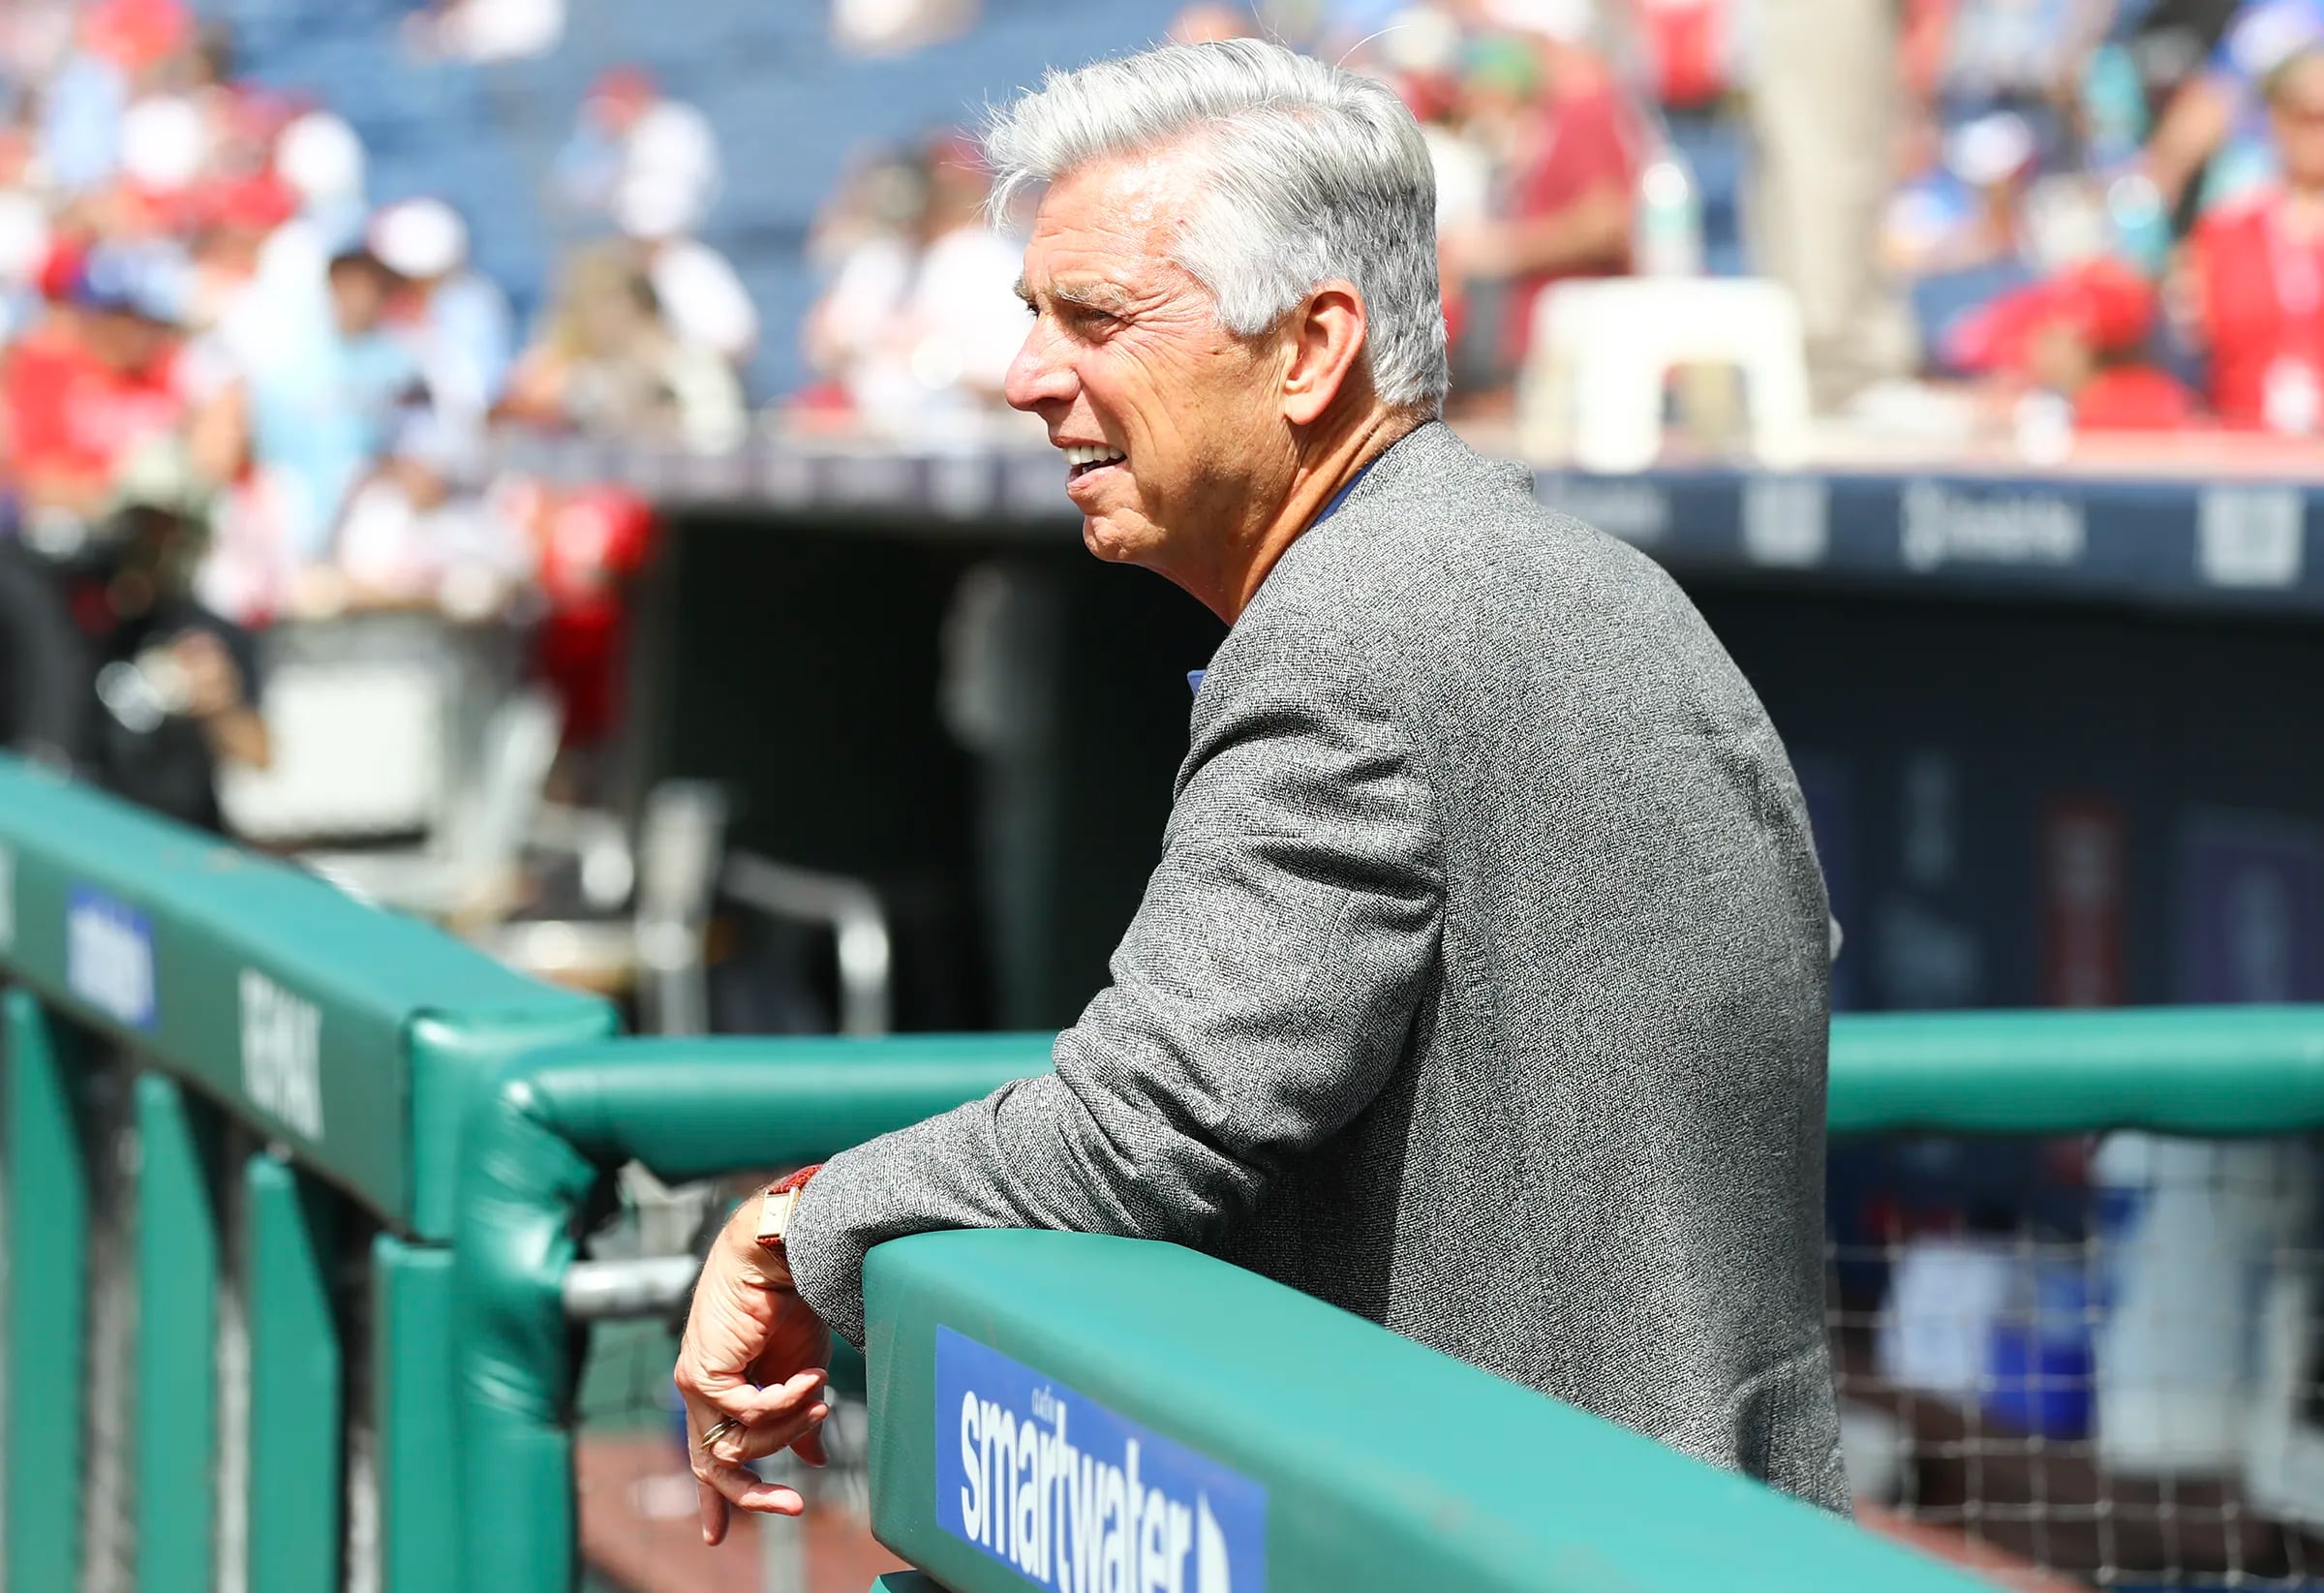 The Phillies are in contention and that means president of baseball operations Dave Dombrowski likely will be busy at the trade deadline.